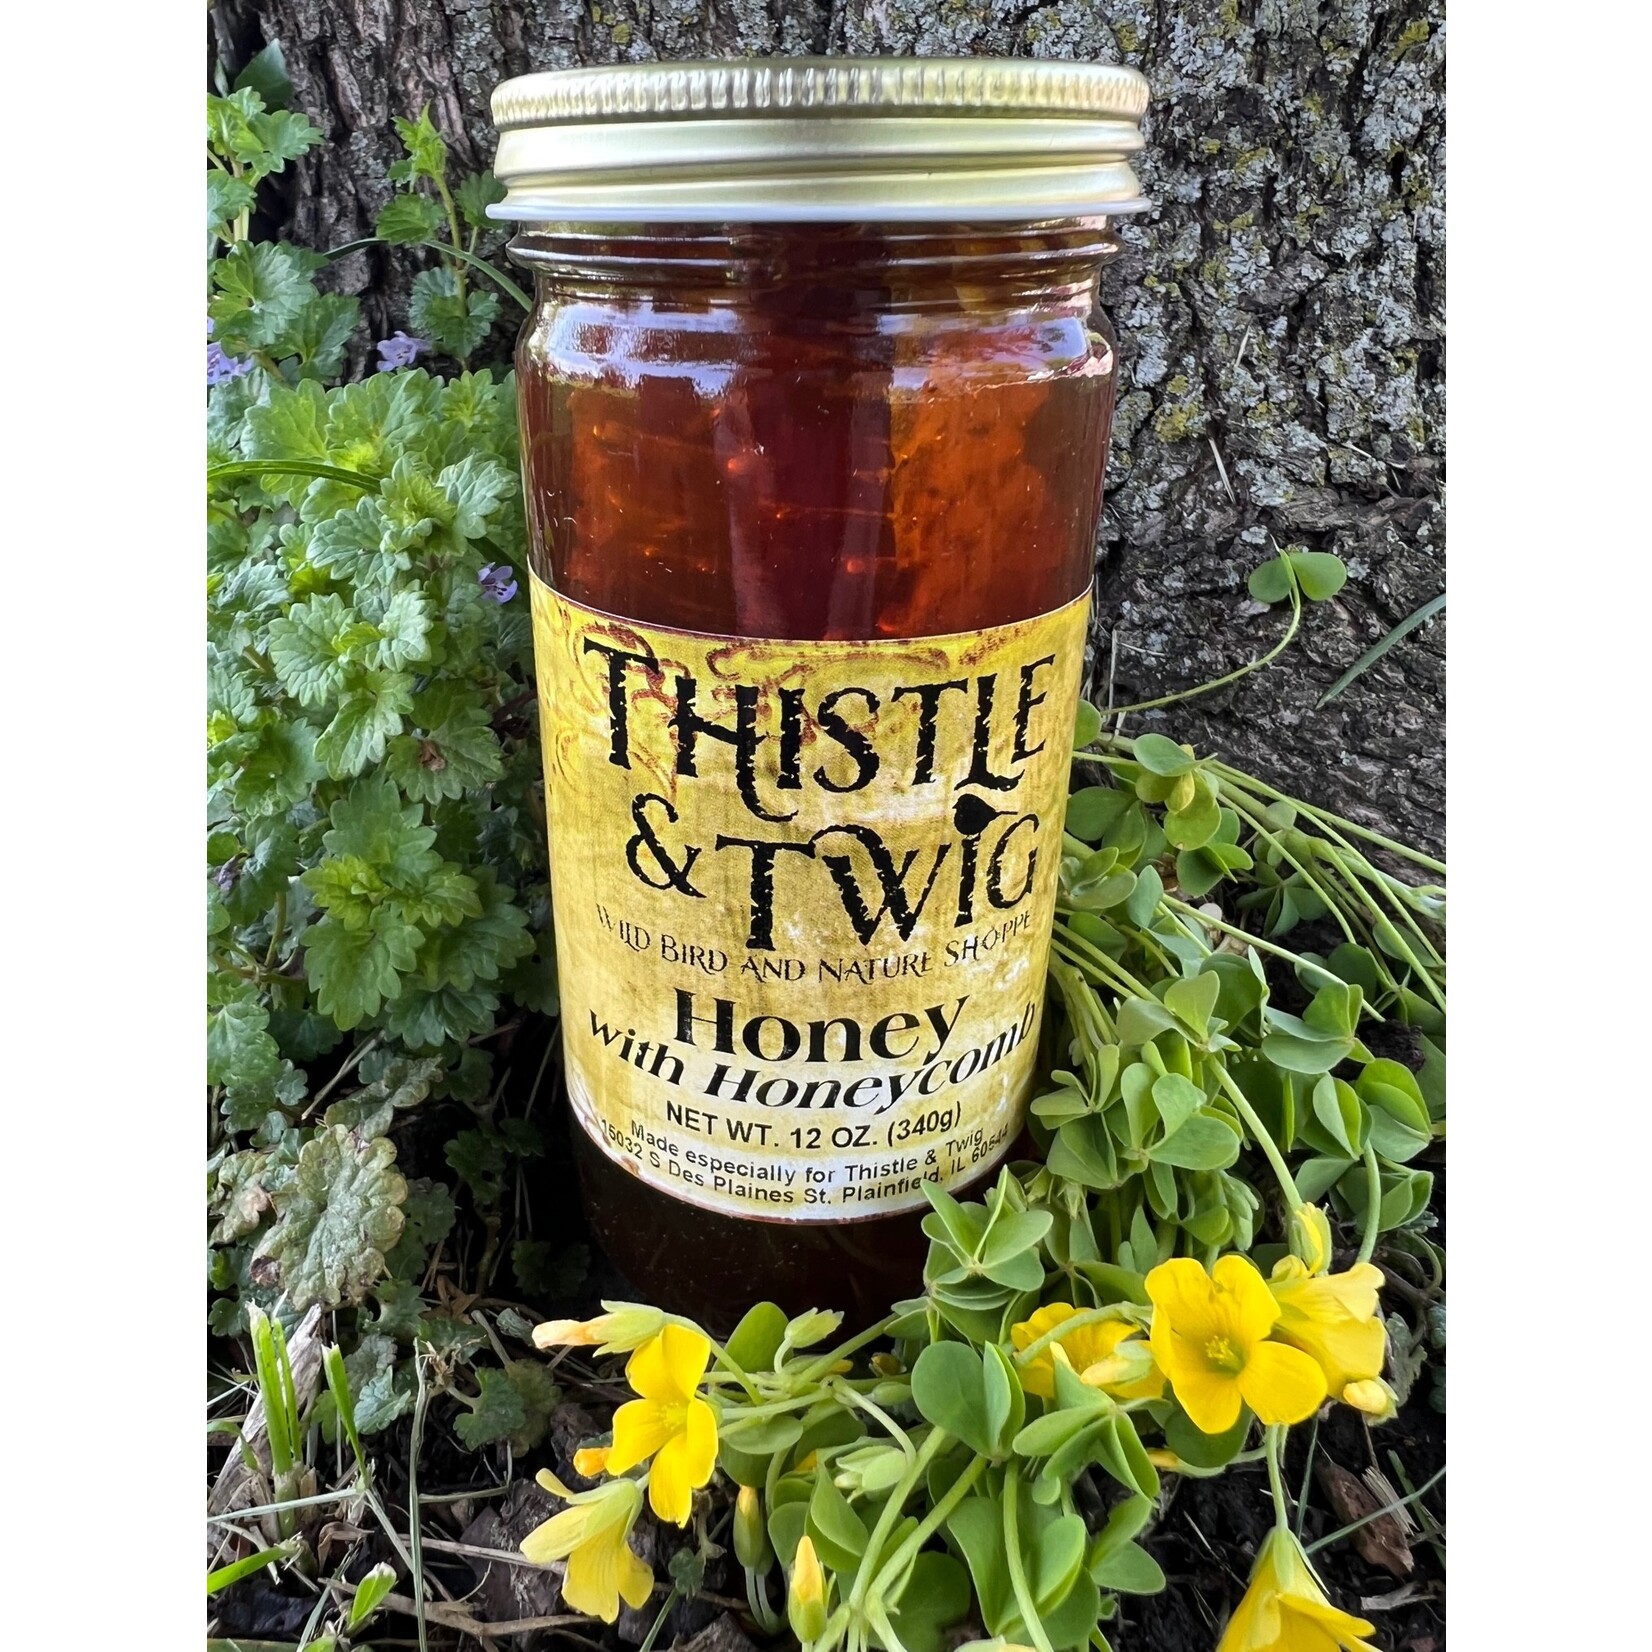 Thistle and Twig Honey with Honeycomb 8 oz